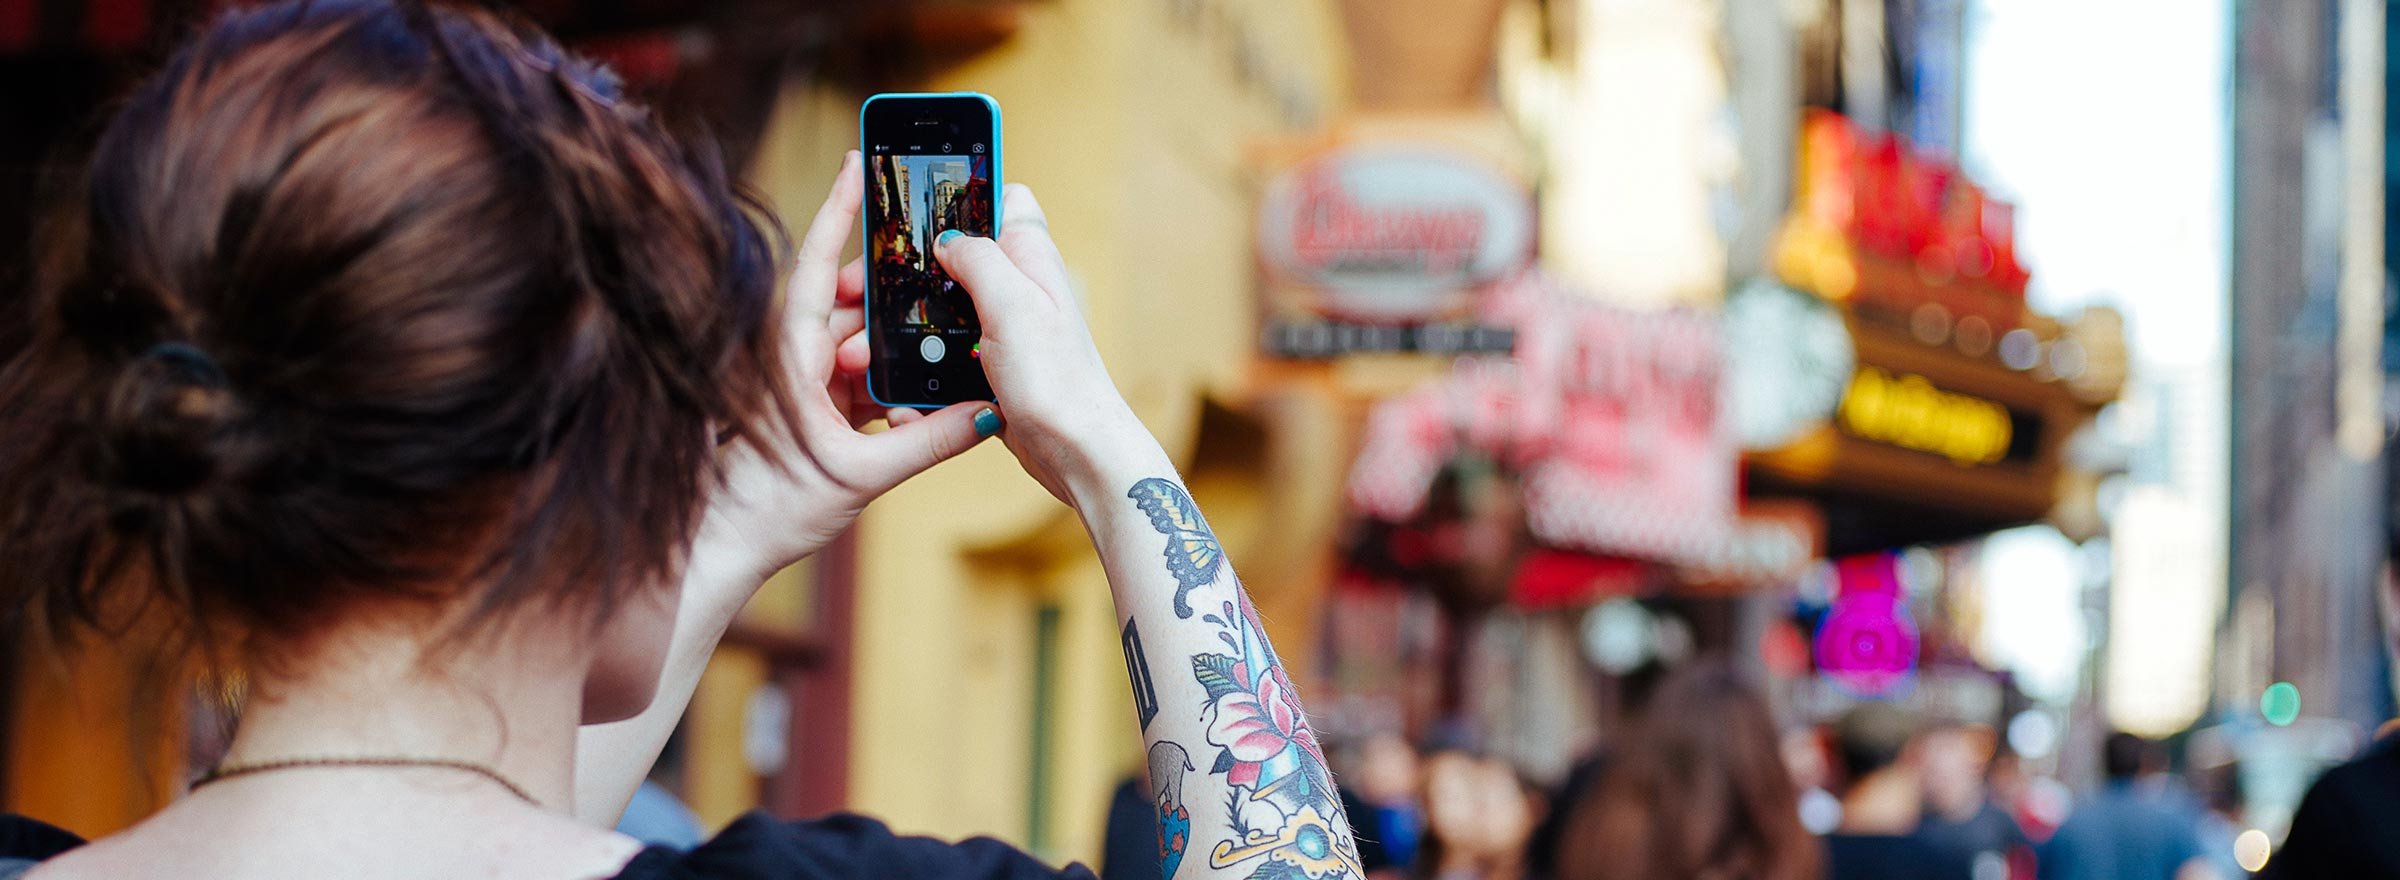 woman with a tattooed arm taking a picture with her cellphone